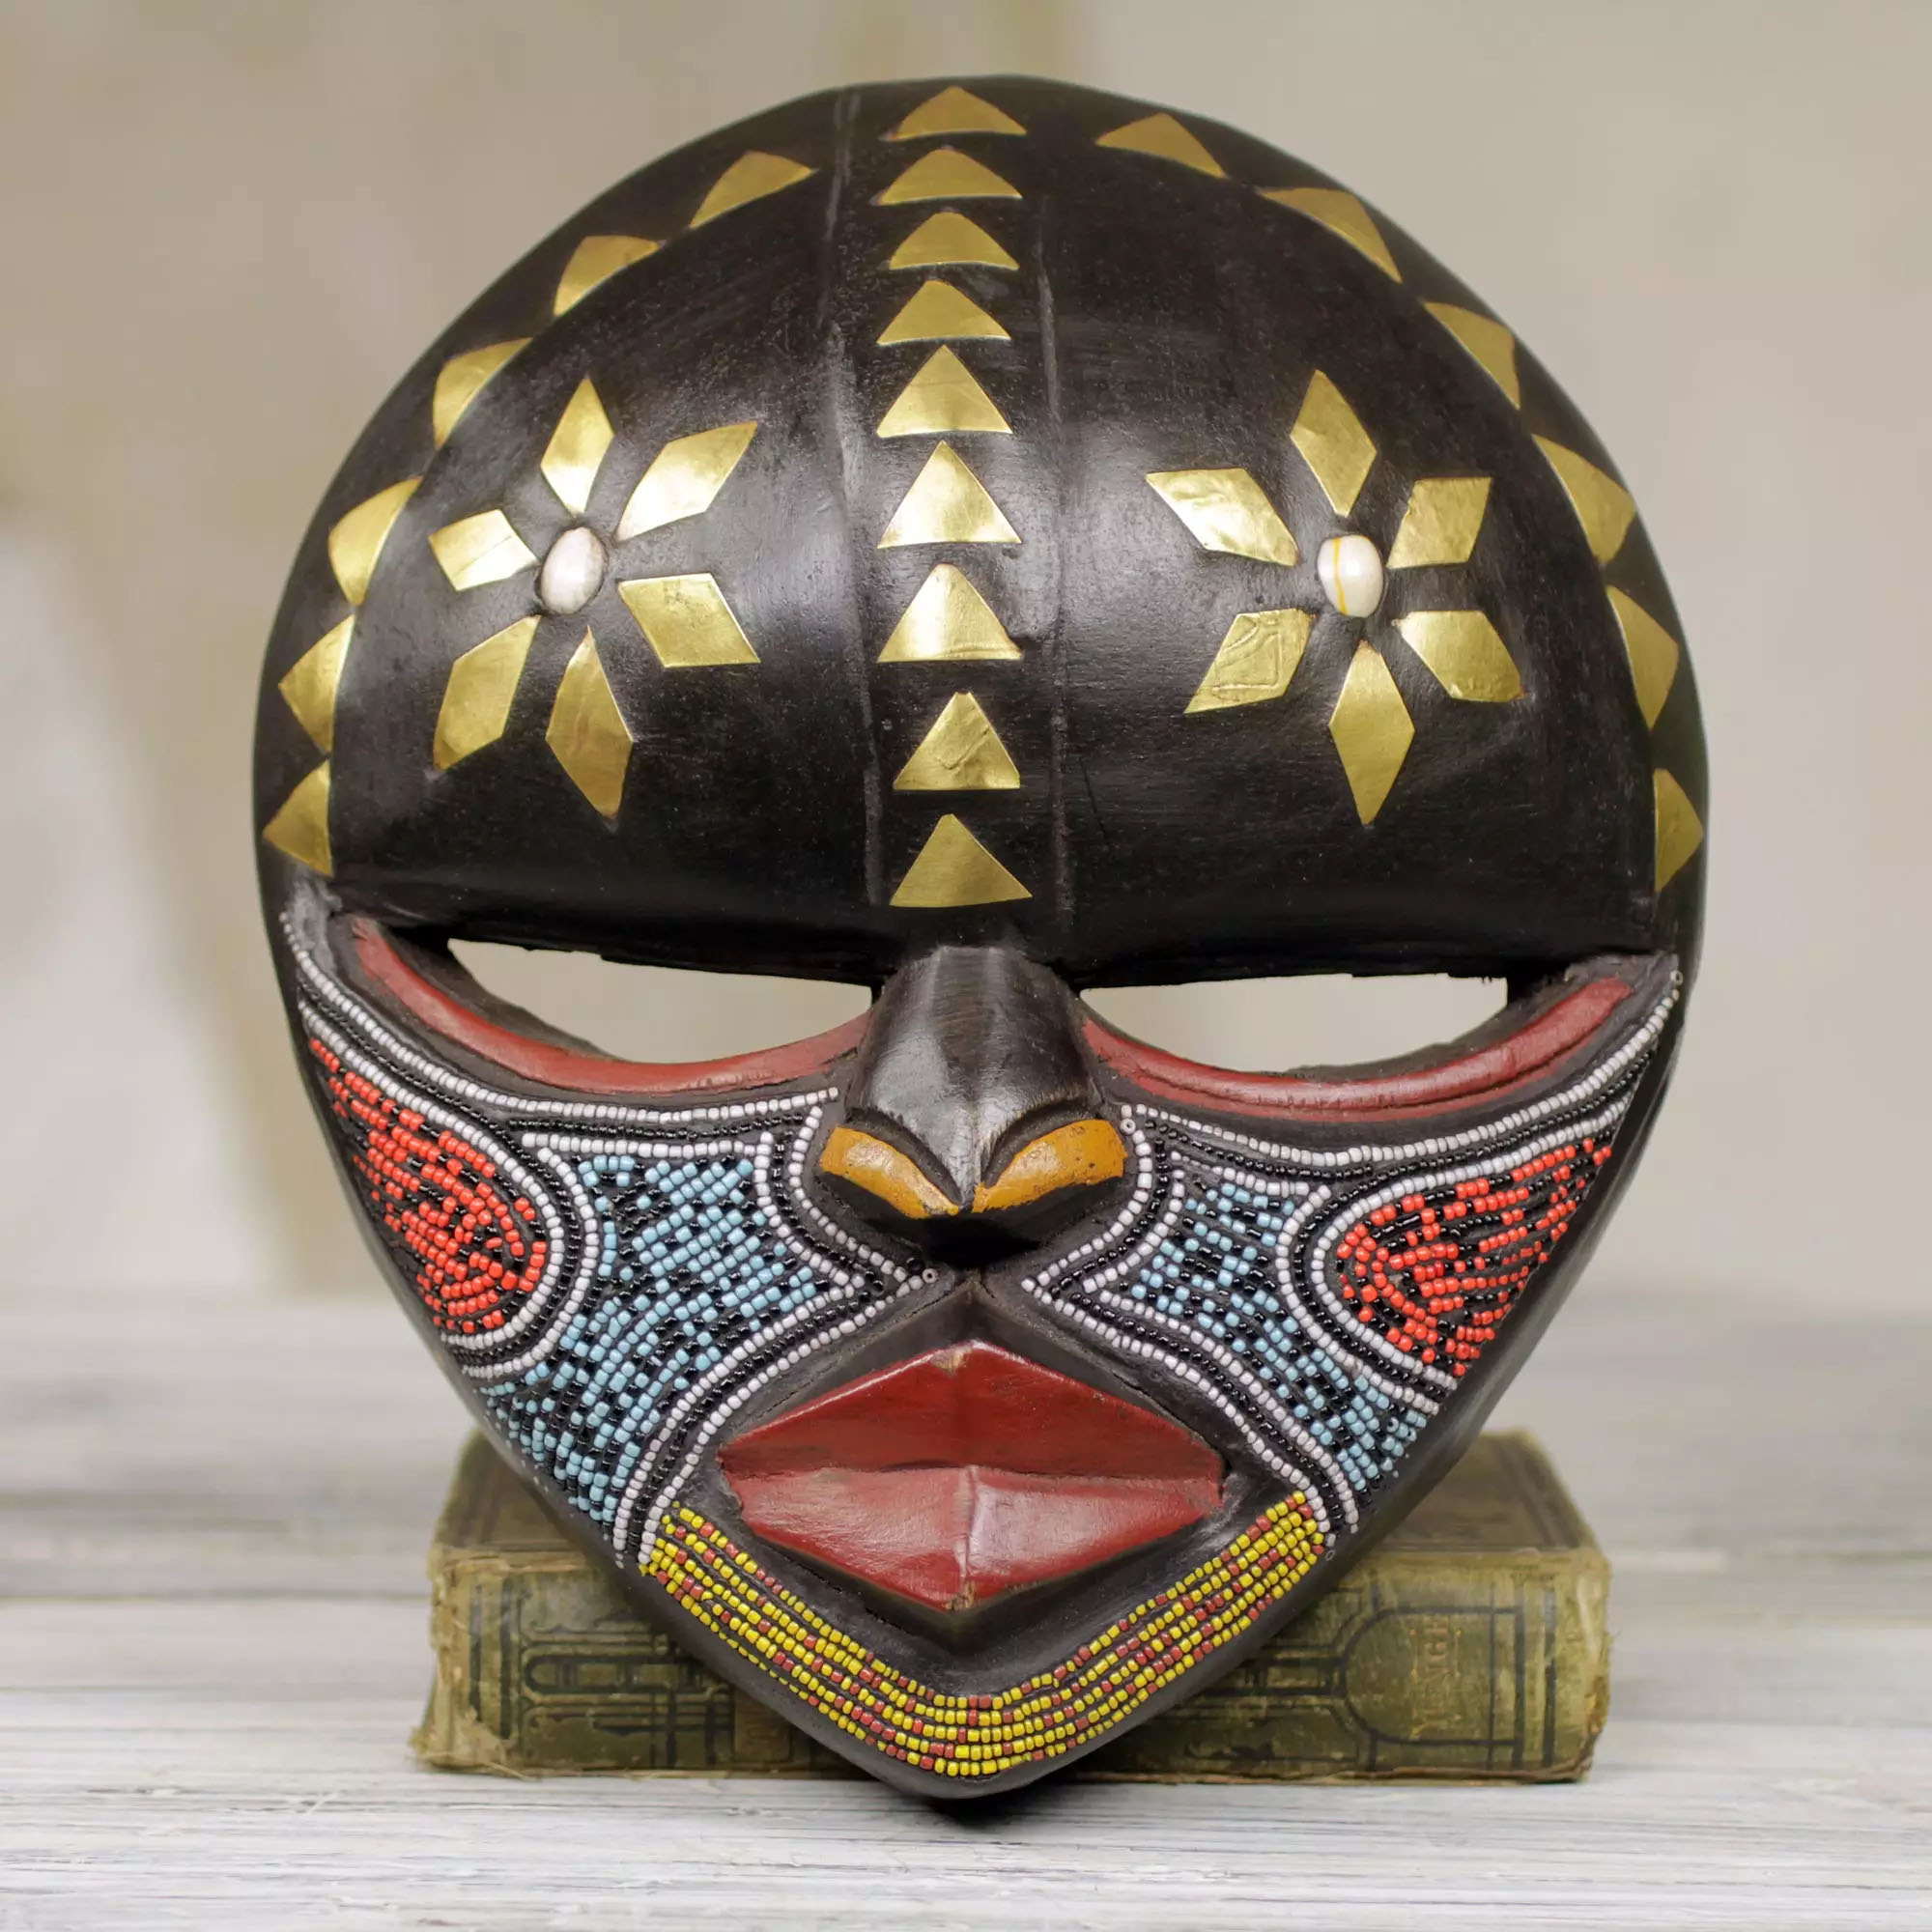 How to Decorate Your Home with Masks. Decorating with Masks.